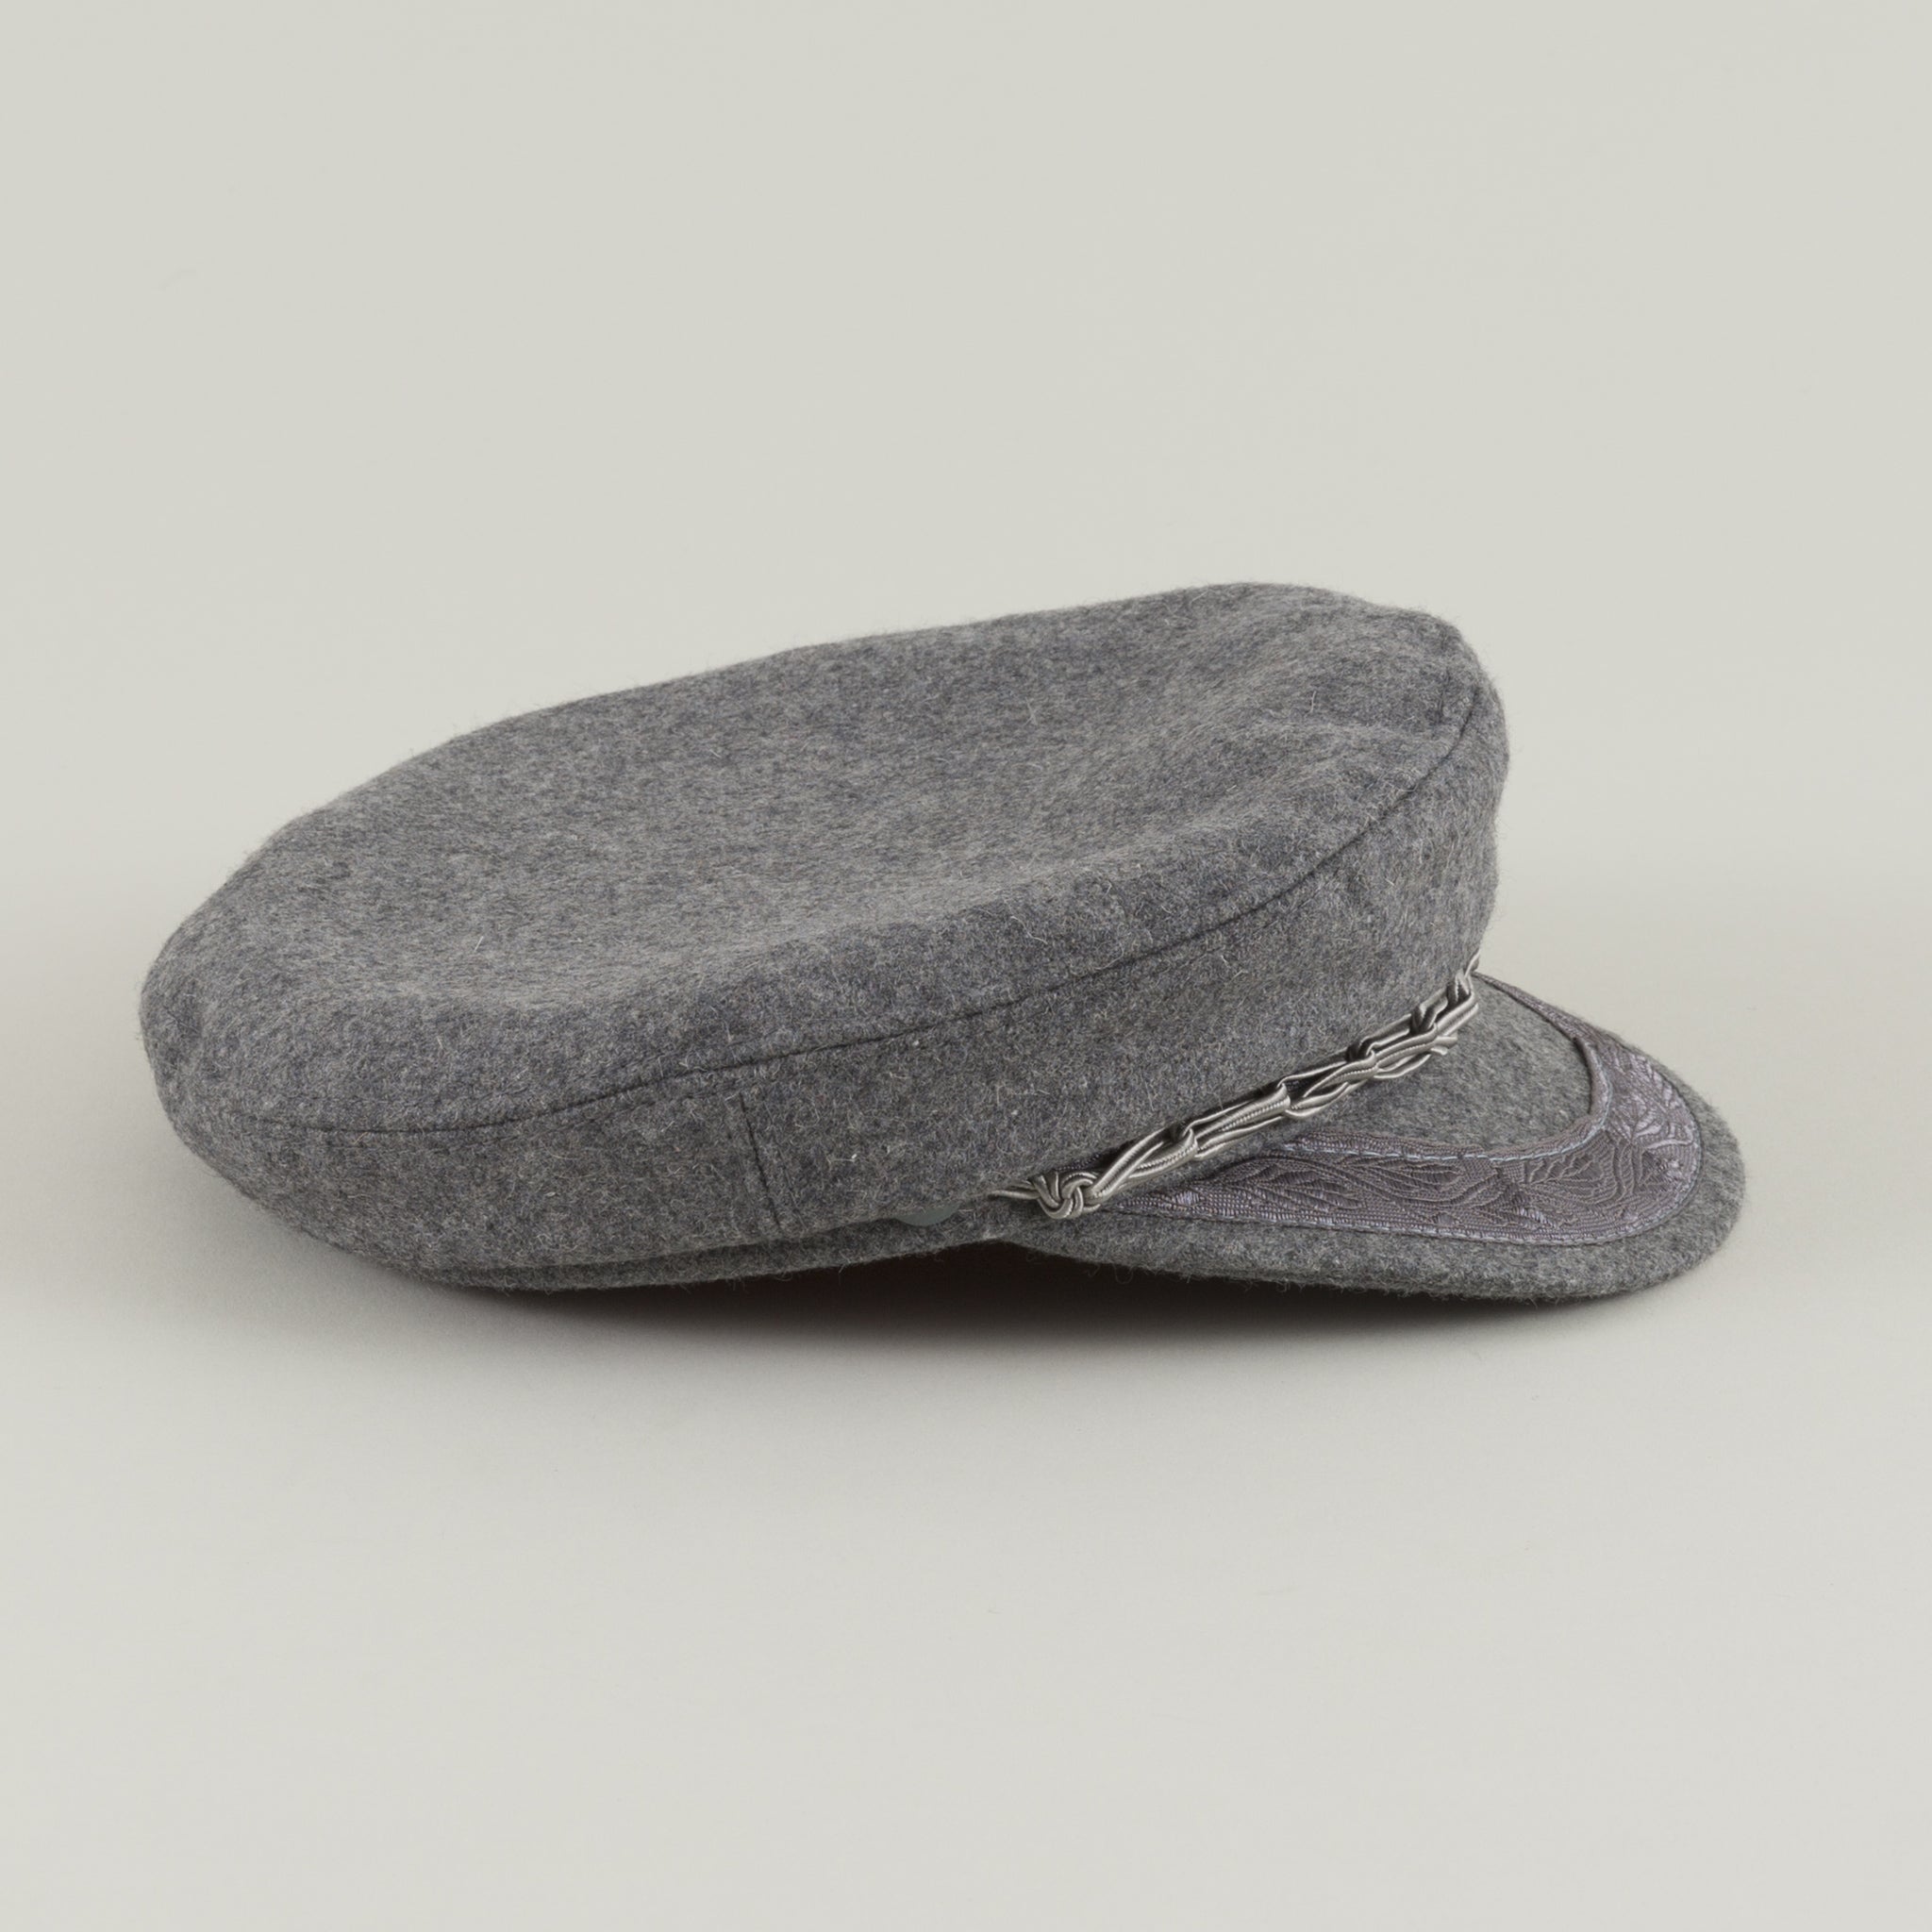 Greek Fisherman's Cap, Grey - The Stronghold